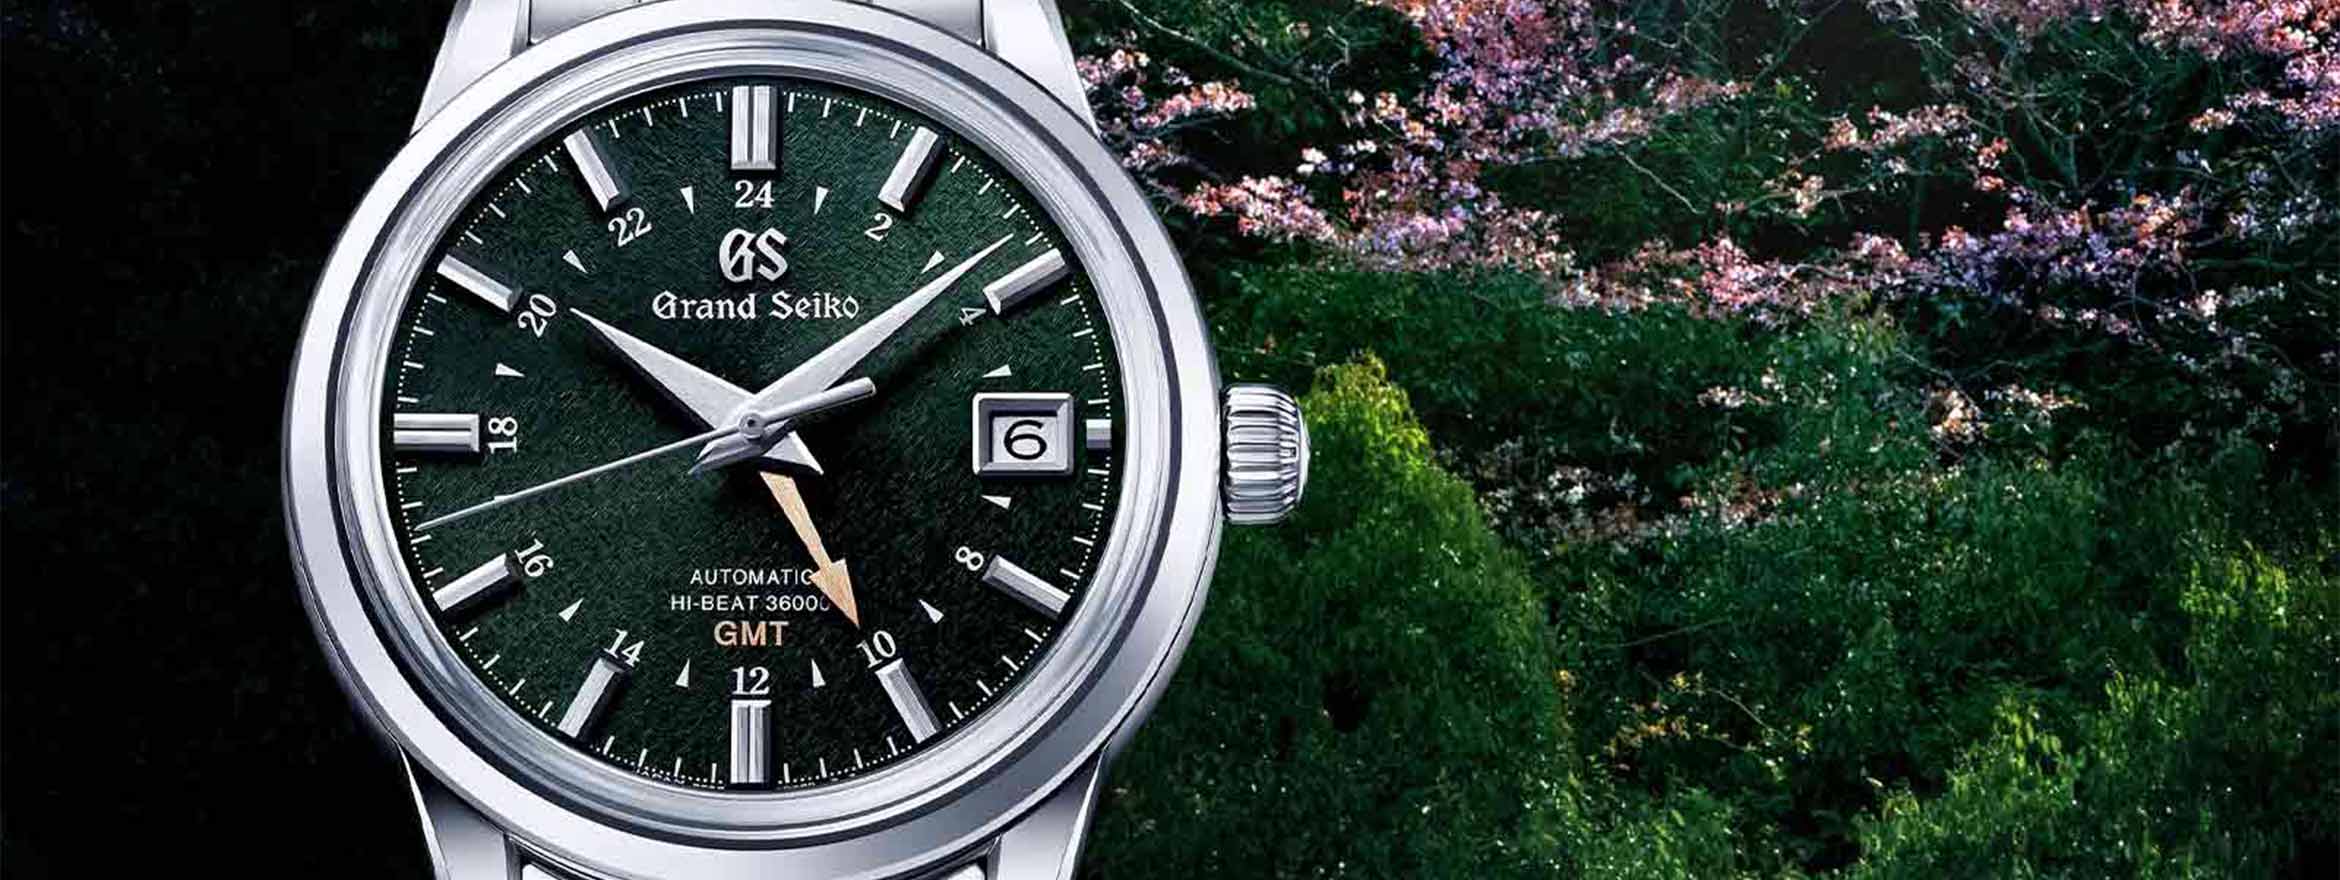 The Most Interesting Watches of Grand Seiko Pop-Up at Watches of Switzerland NEX